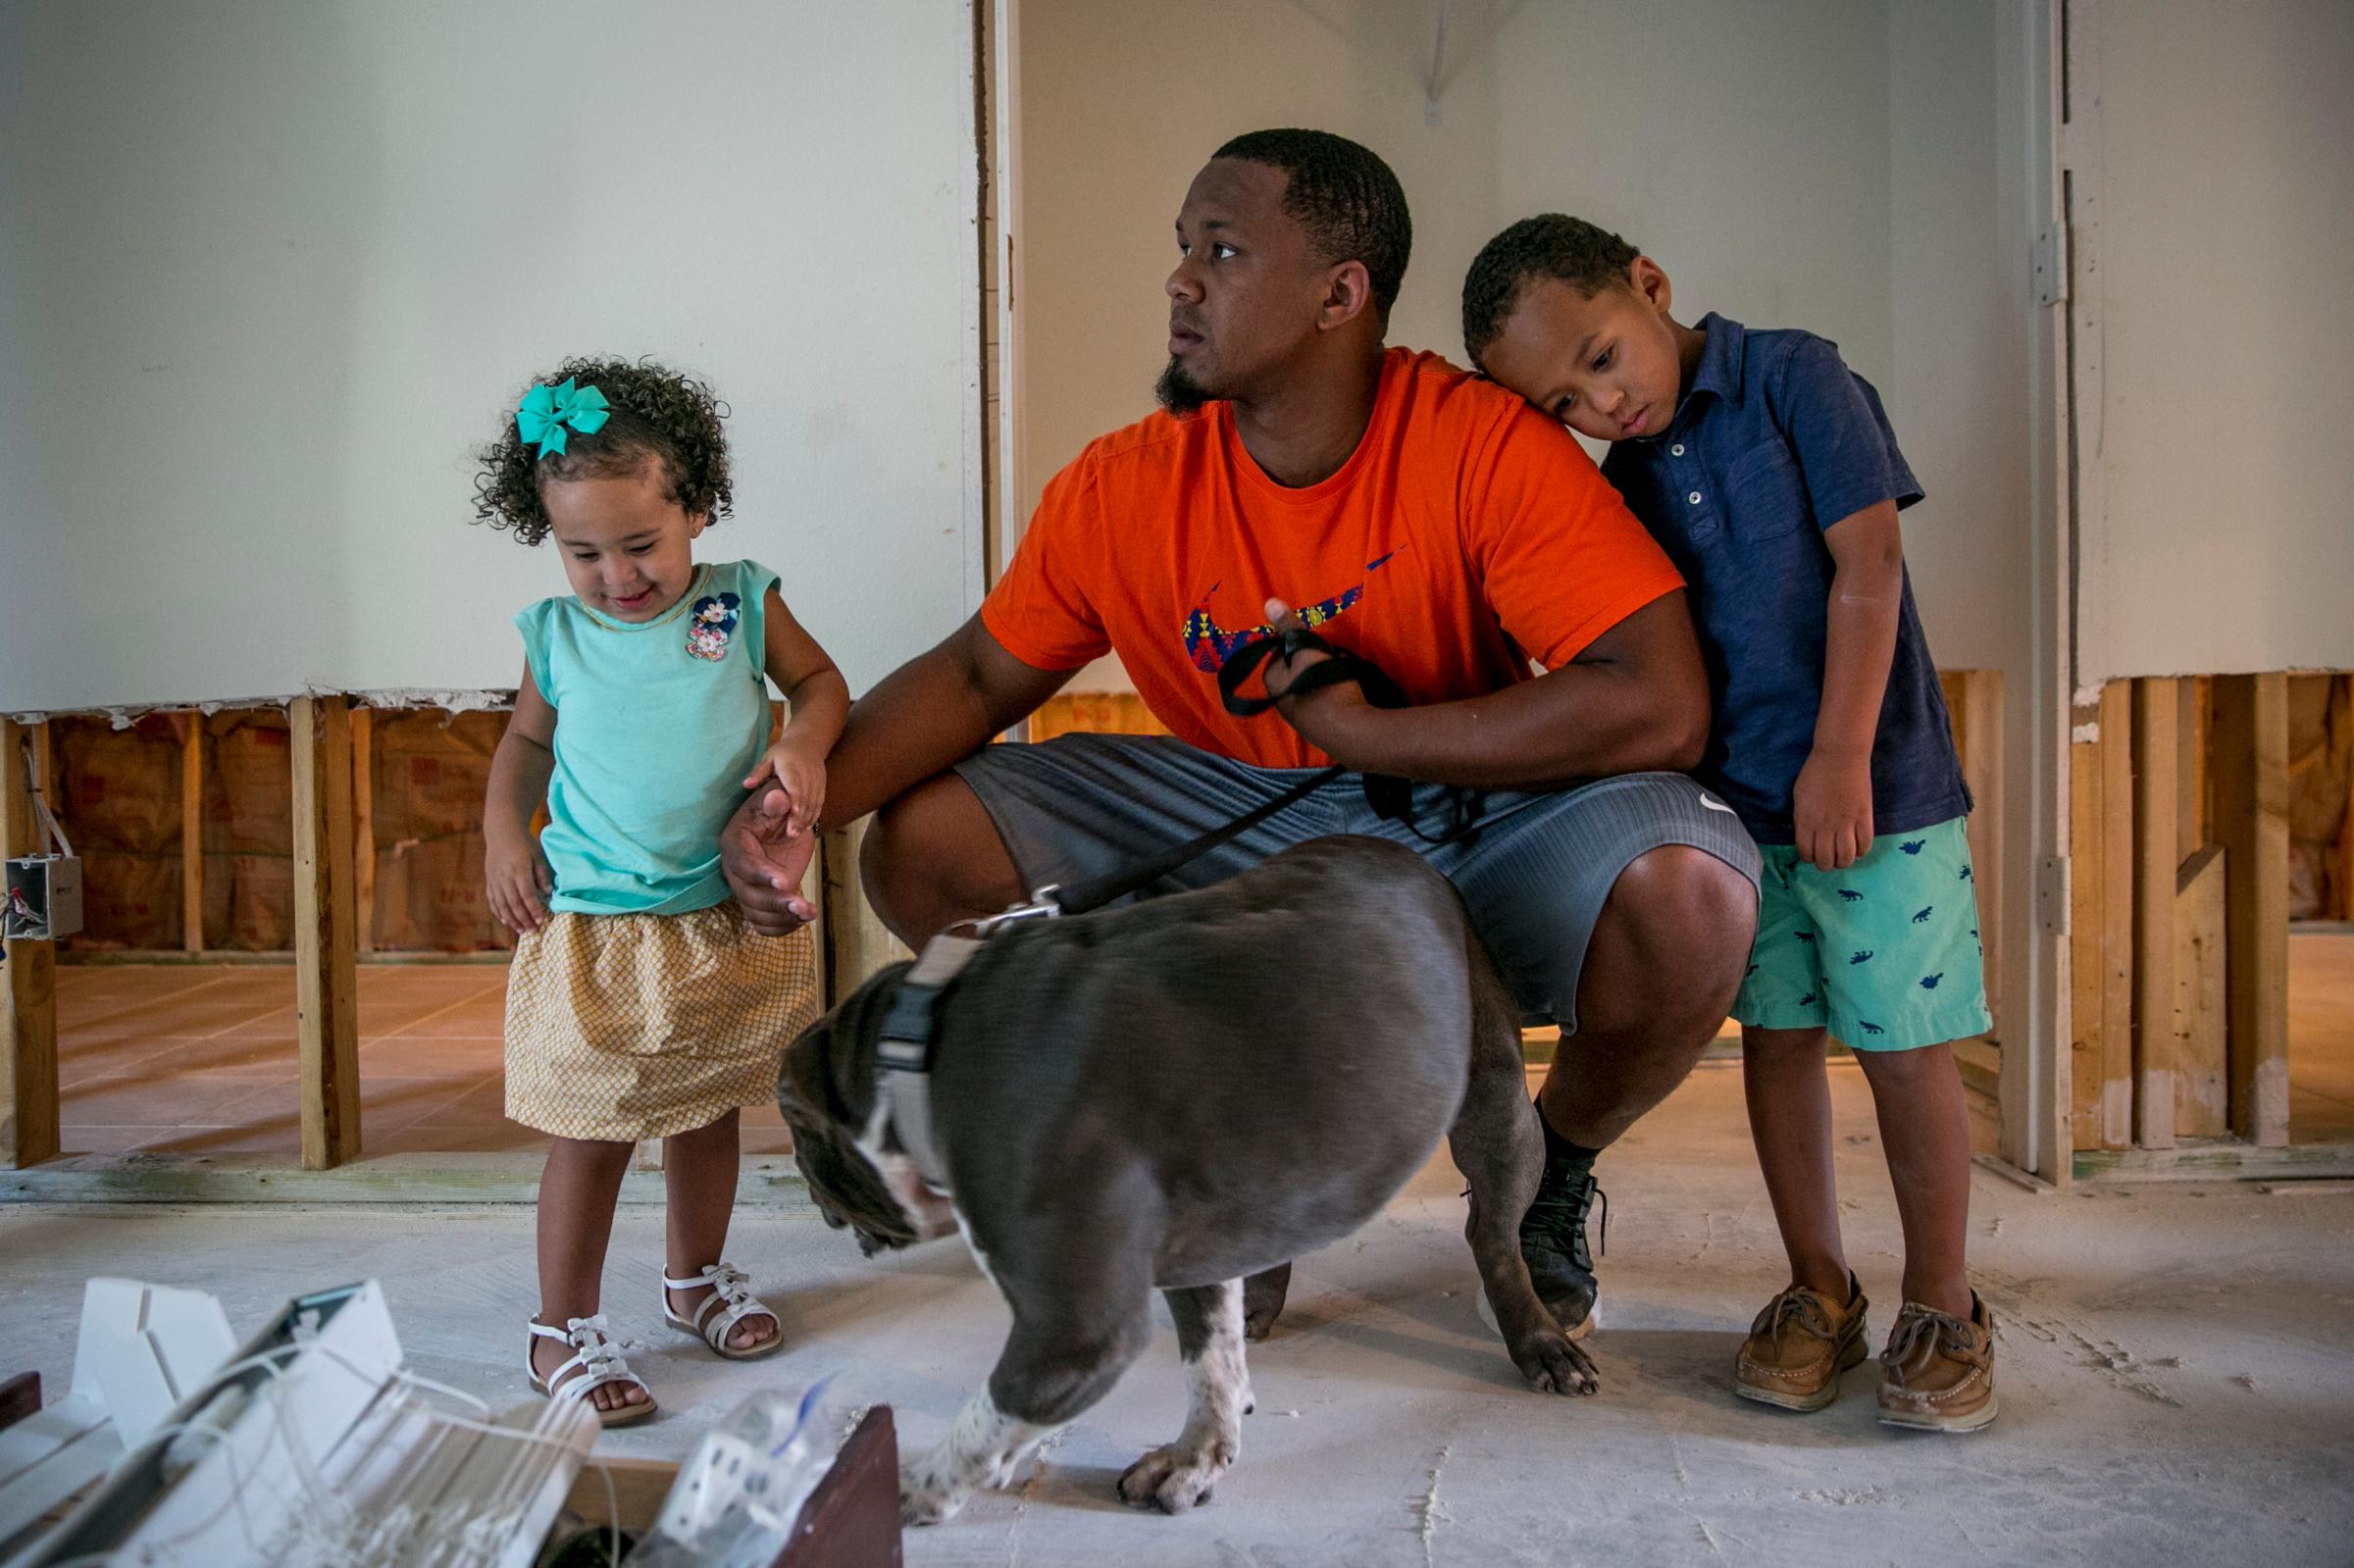 HOUSTON, TEXAS - September 12, 2017: Aubree, 1; Bruce the dog; Isiah, 28; and Bryson, 4, inside their home. The Courtney family's home in the Hunterwood neighborhood of Houston flooded during Hurricane Harvey.  CREDIT: Ilana Panich-Linsman for TIME